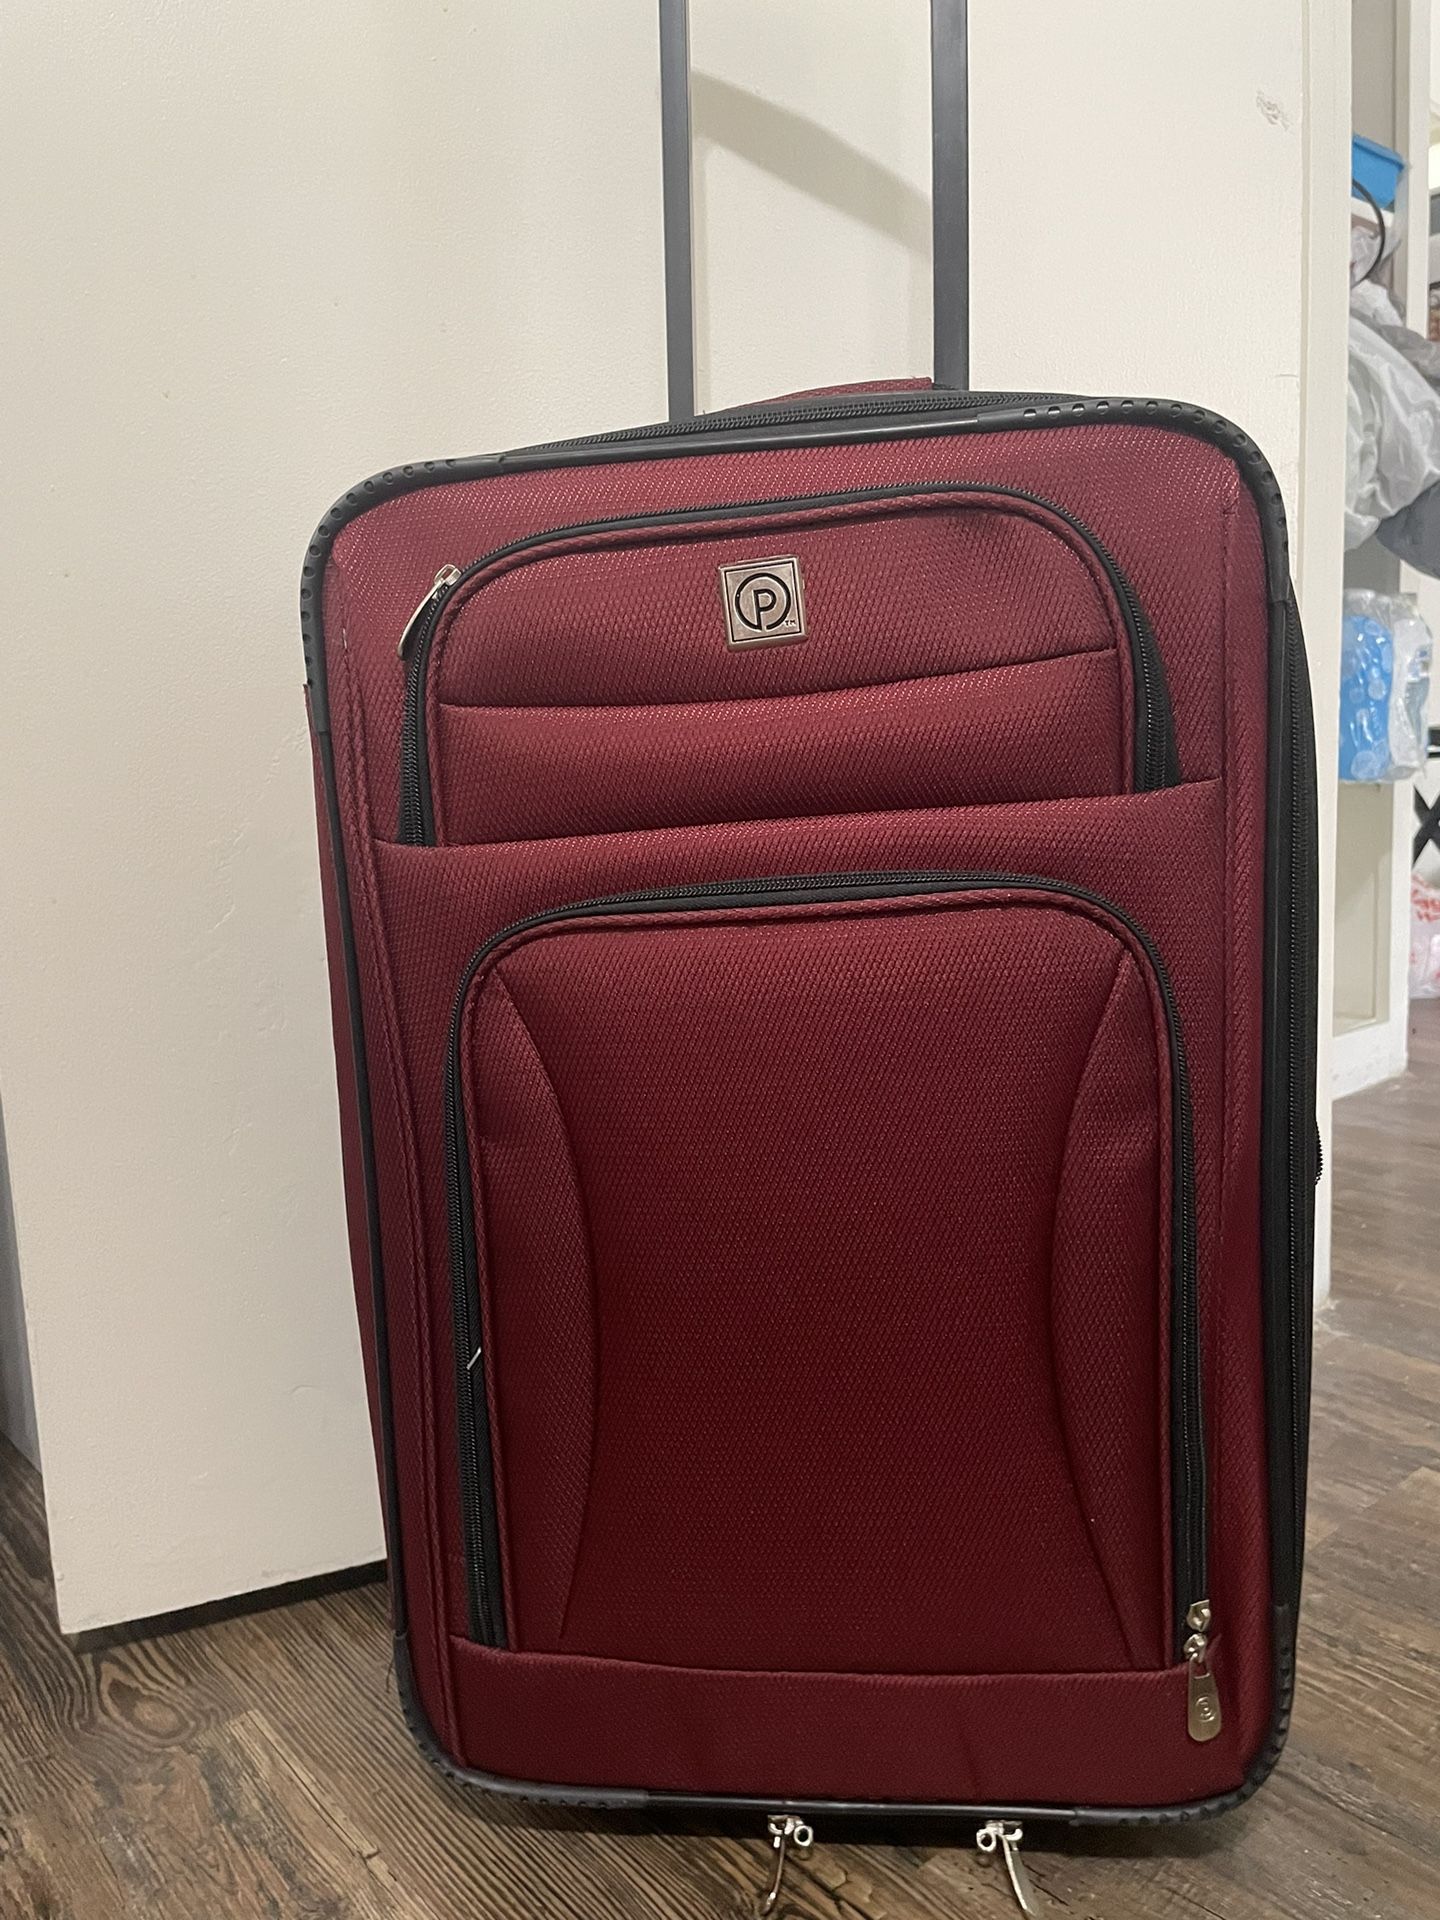 Protege 21” carry-on luggage